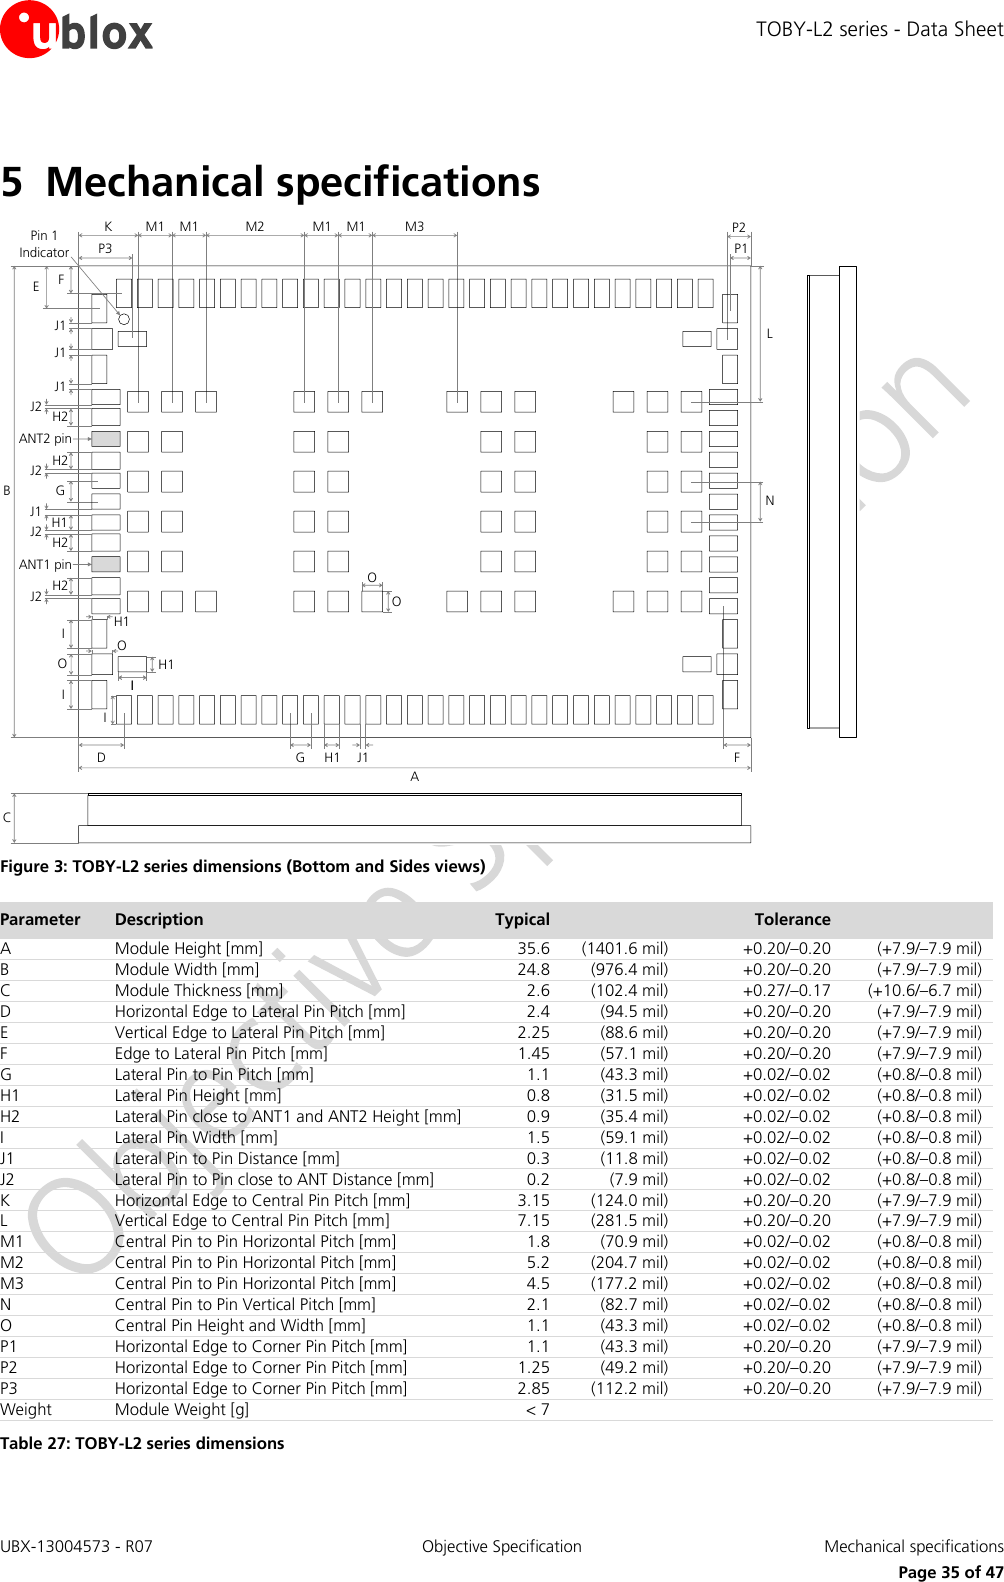 TOBY-L2 series - Data Sheet UBX-13004573 - R07  Objective Specification  Mechanical specifications   Page 35 of 47 5 Mechanical specifications CIAGH1 J1D FKM1 M1 M2 P2BGH1J1H2J2J2 H2ANT1 pinOOLNH2J2J2 H2ANT2 pinM1 M1 M3IIIOH1J1J1J1EP3FP1H1IOPin 1 Indicator Figure 3: TOBY-L2 series dimensions (Bottom and Sides views) Parameter Description Typical  Tolerance  A Module Height [mm] 35.6 (1401.6 mil) +0.20/–0.20 (+7.9/–7.9 mil) B Module Width [mm] 24.8 (976.4 mil) +0.20/–0.20 (+7.9/–7.9 mil) C Module Thickness [mm] 2.6 (102.4 mil) +0.27/–0.17 (+10.6/–6.7 mil) D Horizontal Edge to Lateral Pin Pitch [mm] 2.4 (94.5 mil) +0.20/–0.20 (+7.9/–7.9 mil) E Vertical Edge to Lateral Pin Pitch [mm] 2.25 (88.6 mil) +0.20/–0.20 (+7.9/–7.9 mil) F Edge to Lateral Pin Pitch [mm] 1.45 (57.1 mil) +0.20/–0.20 (+7.9/–7.9 mil) G Lateral Pin to Pin Pitch [mm] 1.1 (43.3 mil) +0.02/–0.02 (+0.8/–0.8 mil) H1 Lateral Pin Height [mm] 0.8 (31.5 mil) +0.02/–0.02 (+0.8/–0.8 mil) H2 Lateral Pin close to ANT1 and ANT2 Height [mm] 0.9 (35.4 mil) +0.02/–0.02 (+0.8/–0.8 mil) I Lateral Pin Width [mm] 1.5 (59.1 mil) +0.02/–0.02 (+0.8/–0.8 mil) J1 Lateral Pin to Pin Distance [mm] 0.3 (11.8 mil) +0.02/–0.02 (+0.8/–0.8 mil) J2 Lateral Pin to Pin close to ANT Distance [mm] 0.2 (7.9 mil) +0.02/–0.02 (+0.8/–0.8 mil) K Horizontal Edge to Central Pin Pitch [mm] 3.15 (124.0 mil) +0.20/–0.20 (+7.9/–7.9 mil) L Vertical Edge to Central Pin Pitch [mm] 7.15 (281.5 mil) +0.20/–0.20 (+7.9/–7.9 mil) M1 Central Pin to Pin Horizontal Pitch [mm] 1.8 (70.9 mil) +0.02/–0.02 (+0.8/–0.8 mil) M2 Central Pin to Pin Horizontal Pitch [mm] 5.2 (204.7 mil) +0.02/–0.02 (+0.8/–0.8 mil) M3 Central Pin to Pin Horizontal Pitch [mm] 4.5 (177.2 mil) +0.02/–0.02 (+0.8/–0.8 mil) N Central Pin to Pin Vertical Pitch [mm] 2.1 (82.7 mil) +0.02/–0.02 (+0.8/–0.8 mil) O Central Pin Height and Width [mm] 1.1 (43.3 mil) +0.02/–0.02 (+0.8/–0.8 mil) P1 Horizontal Edge to Corner Pin Pitch [mm] 1.1 (43.3 mil) +0.20/–0.20 (+7.9/–7.9 mil) P2 Horizontal Edge to Corner Pin Pitch [mm] 1.25 (49.2 mil) +0.20/–0.20 (+7.9/–7.9 mil) P3 Horizontal Edge to Corner Pin Pitch [mm] 2.85 (112.2 mil) +0.20/–0.20 (+7.9/–7.9 mil) Weight Module Weight [g] &lt; 7    Table 27: TOBY-L2 series dimensions  